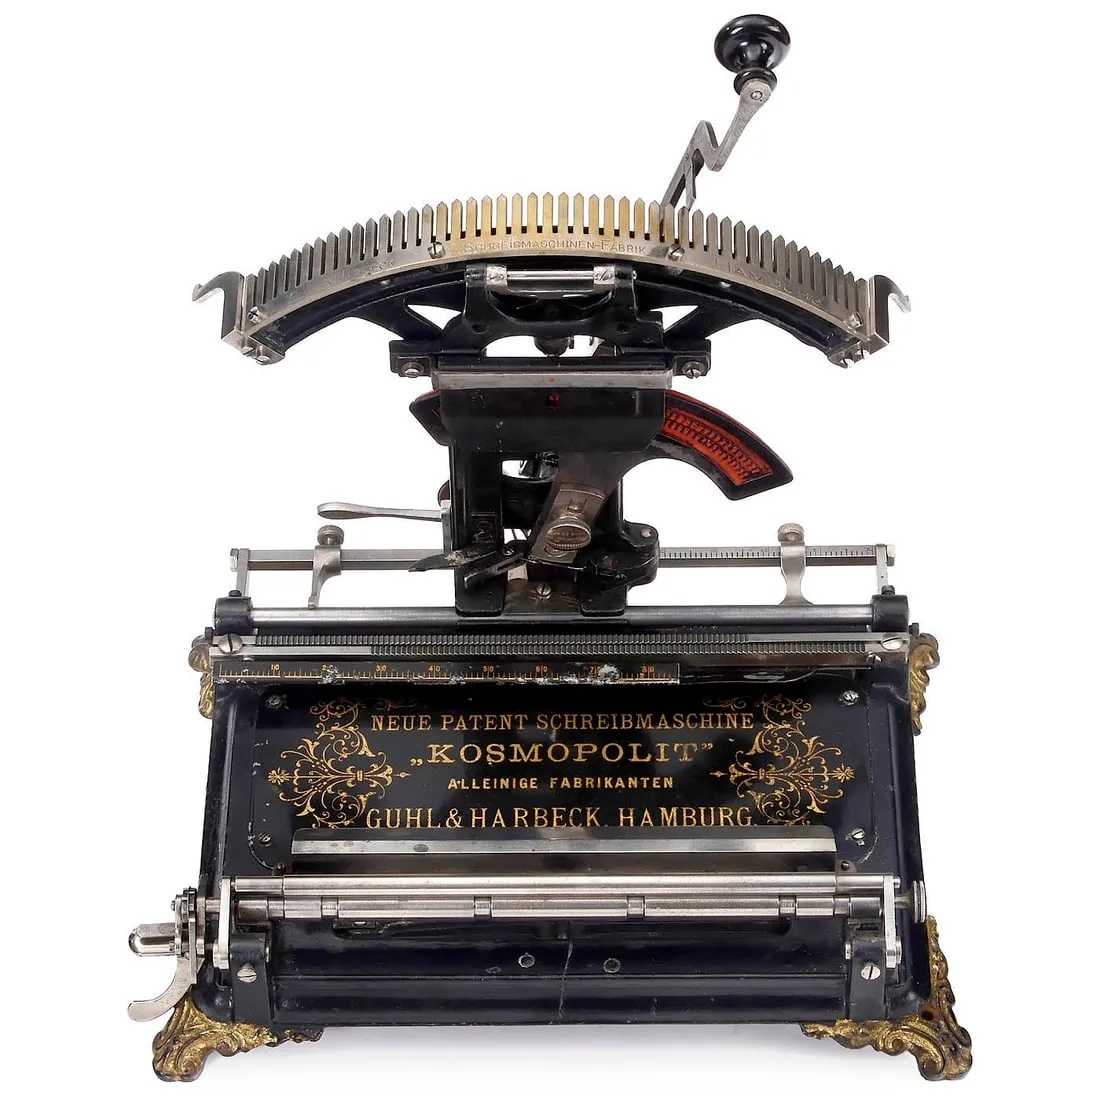 Kosmopolit typewriter, which sold for €18,000 ($19,490, or $46,380 with buyer’s premium) at Breker.